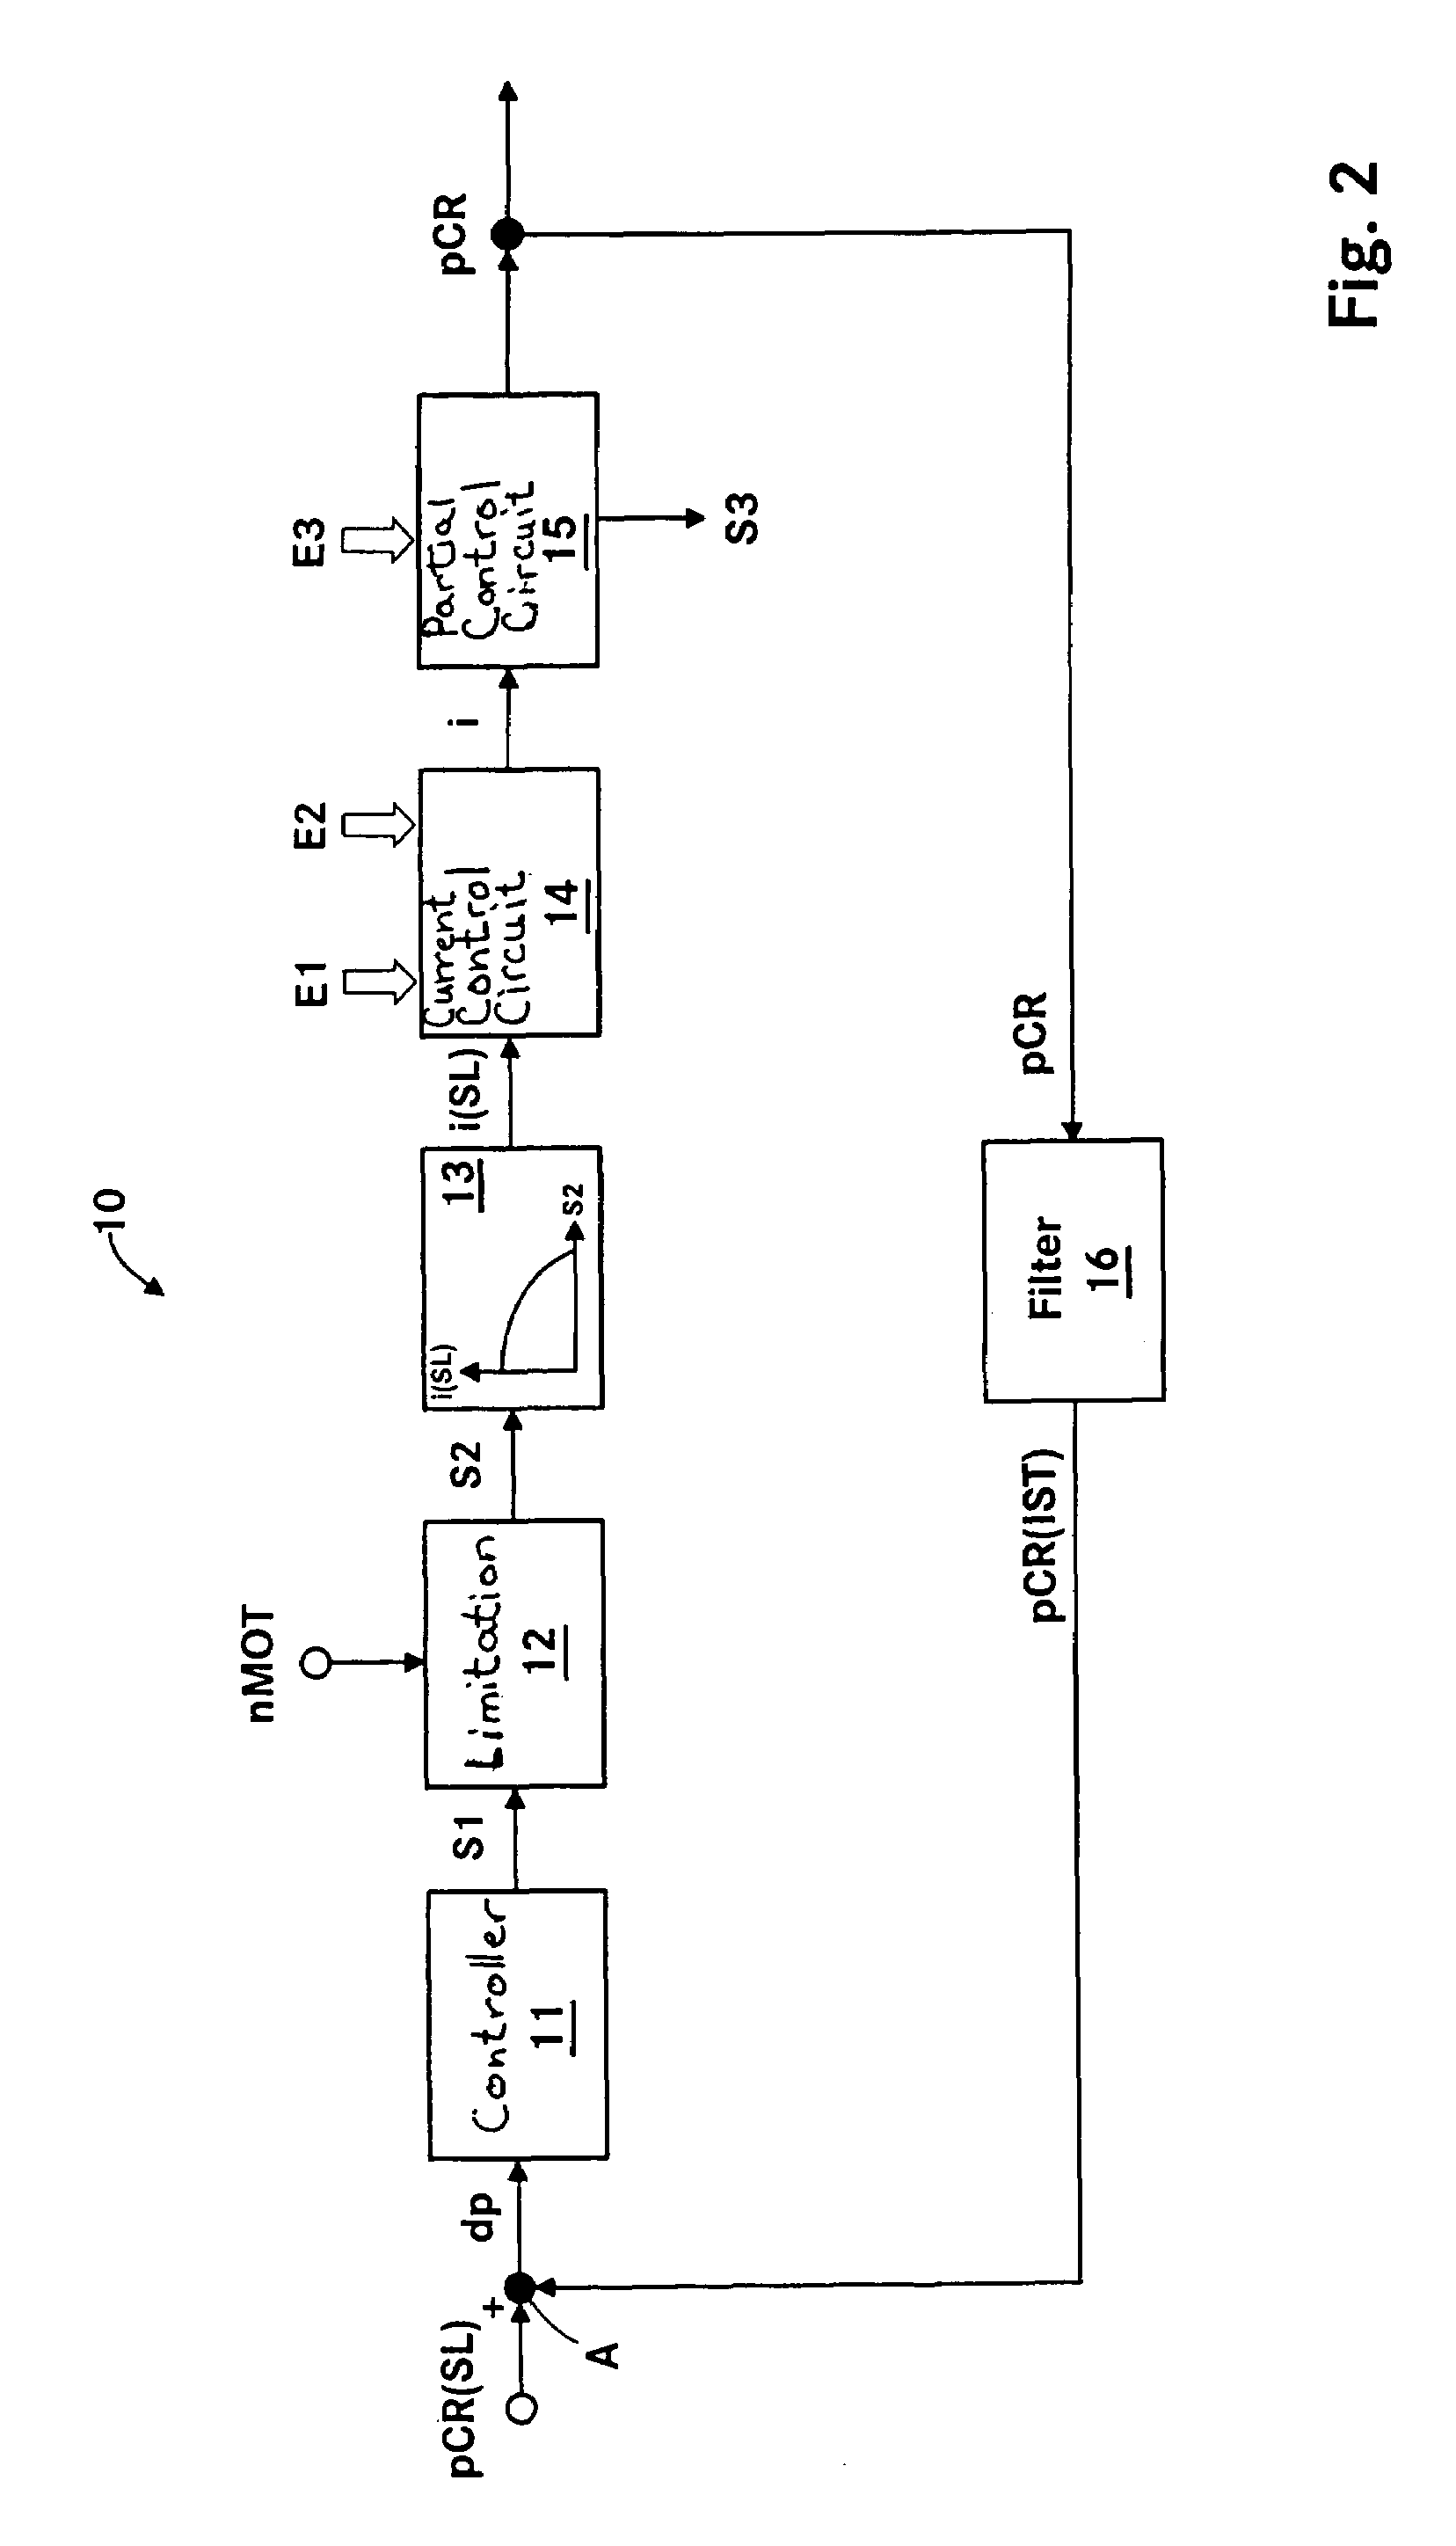 Method and apparatus for controlling the pressure in a common rail system